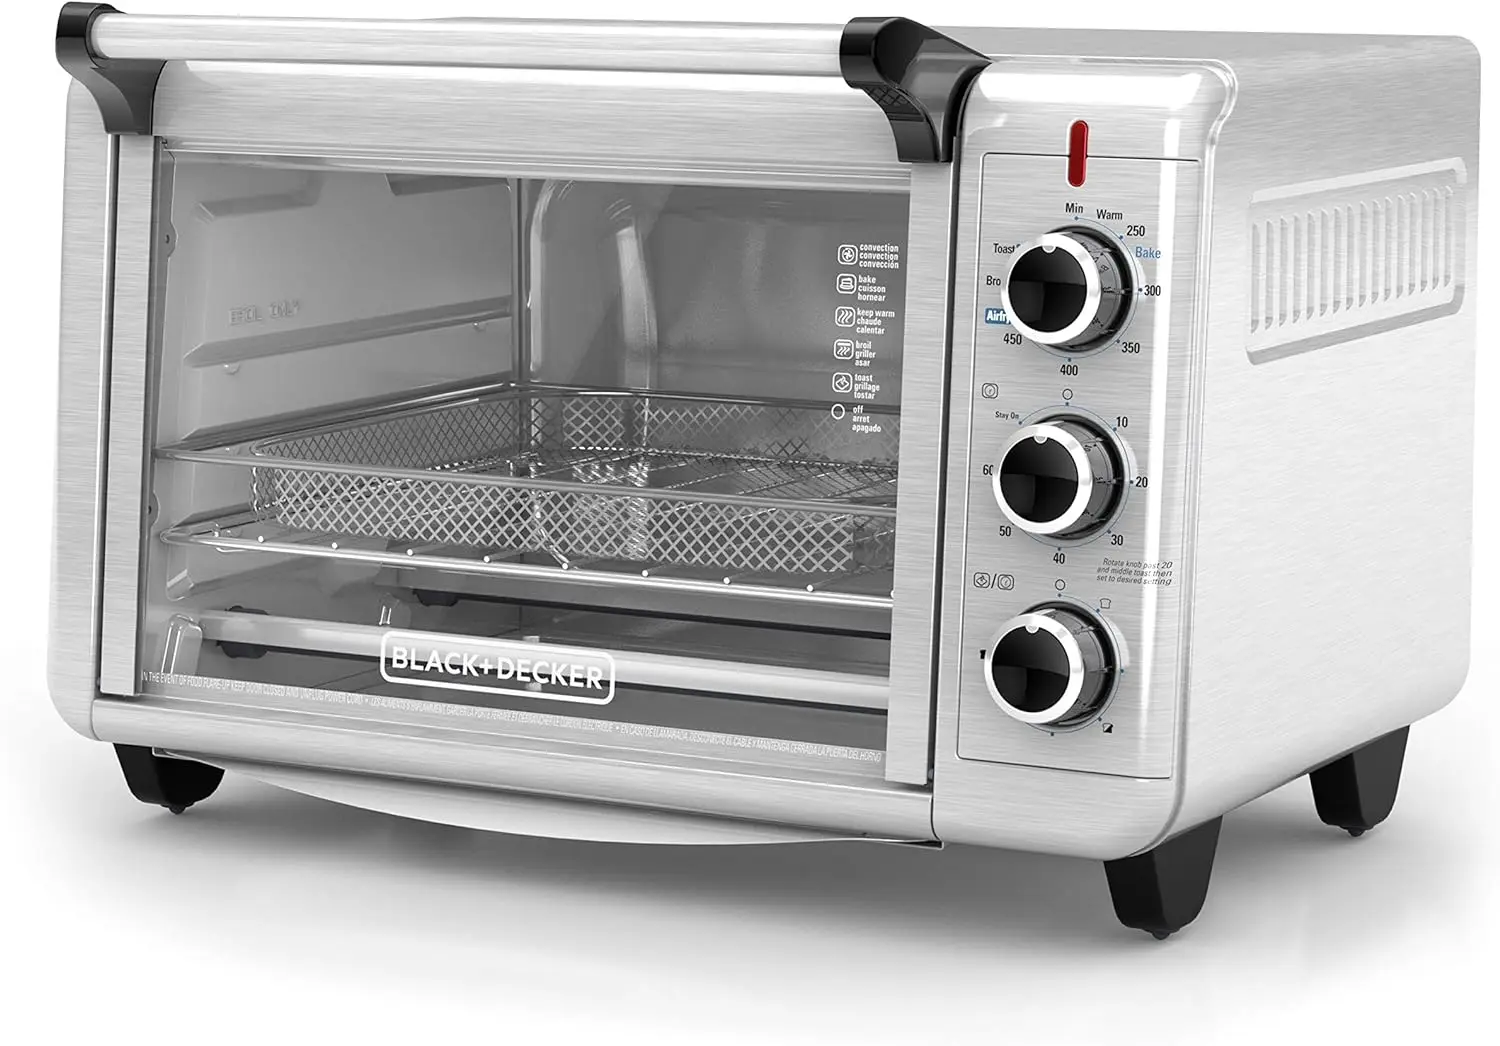 

'N Bake Air Fry Toaster Oven, Stainless Steel, TO3215SS, 6 Slice